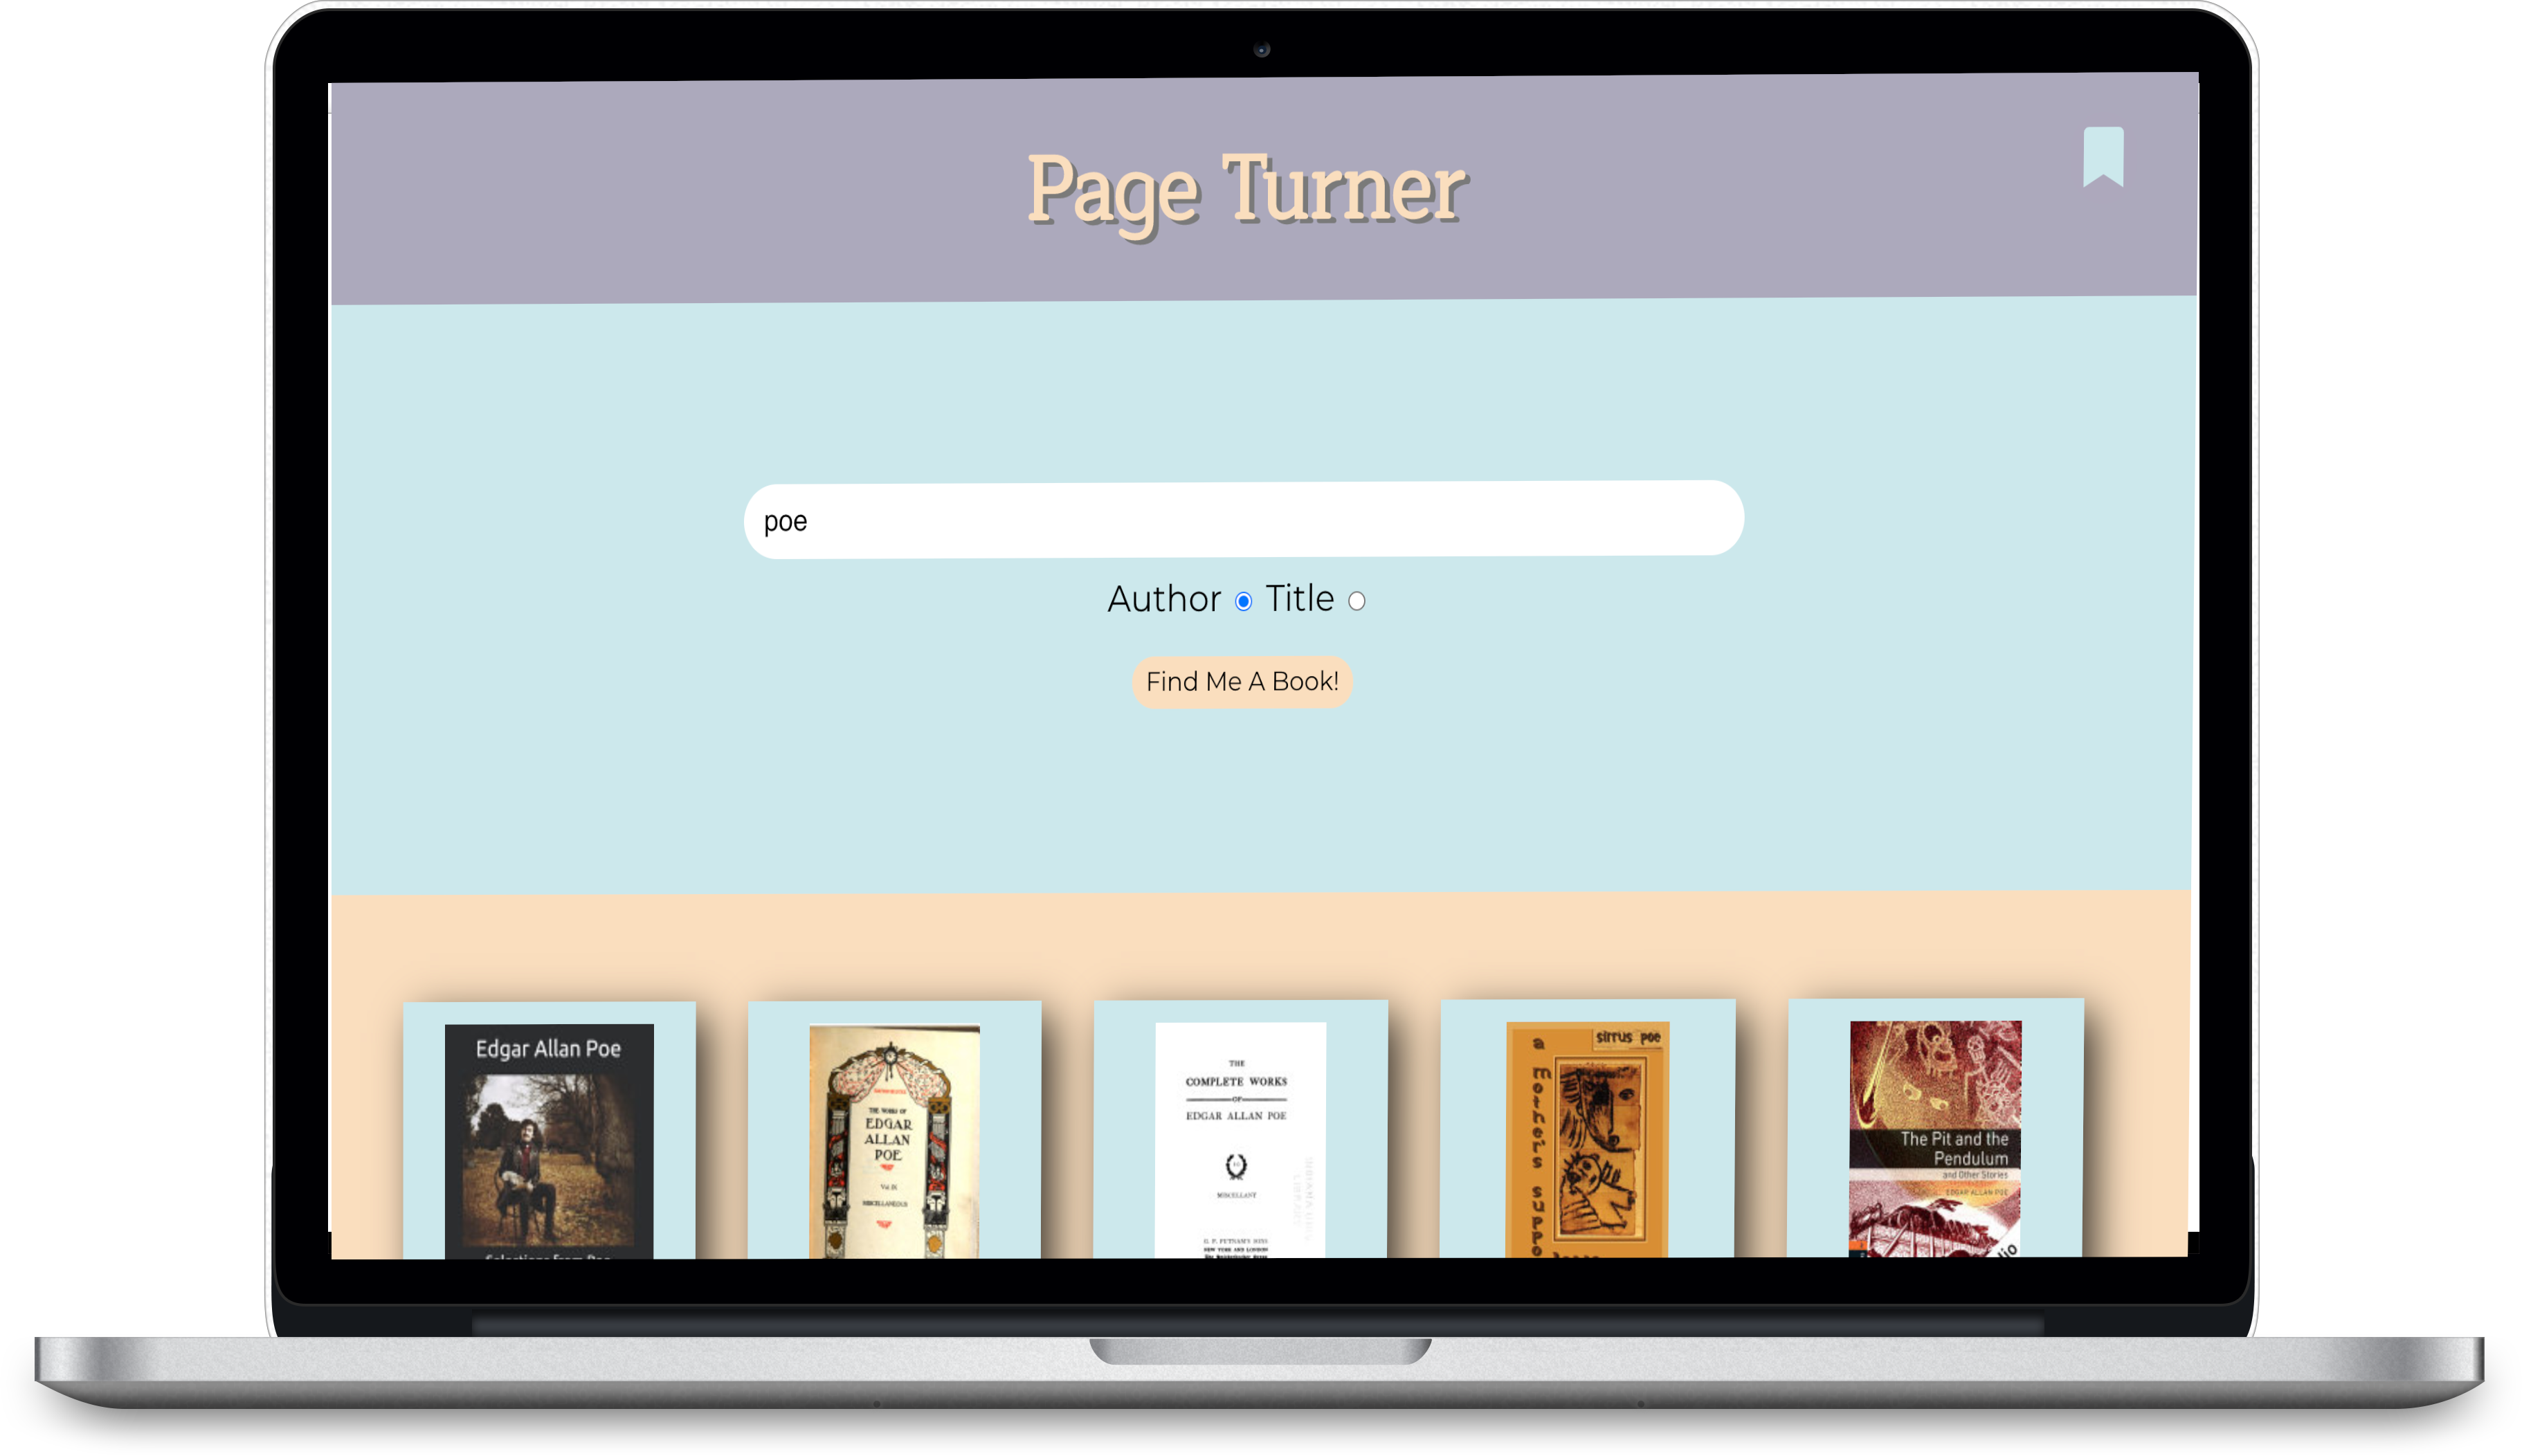 An image of Page Turner app